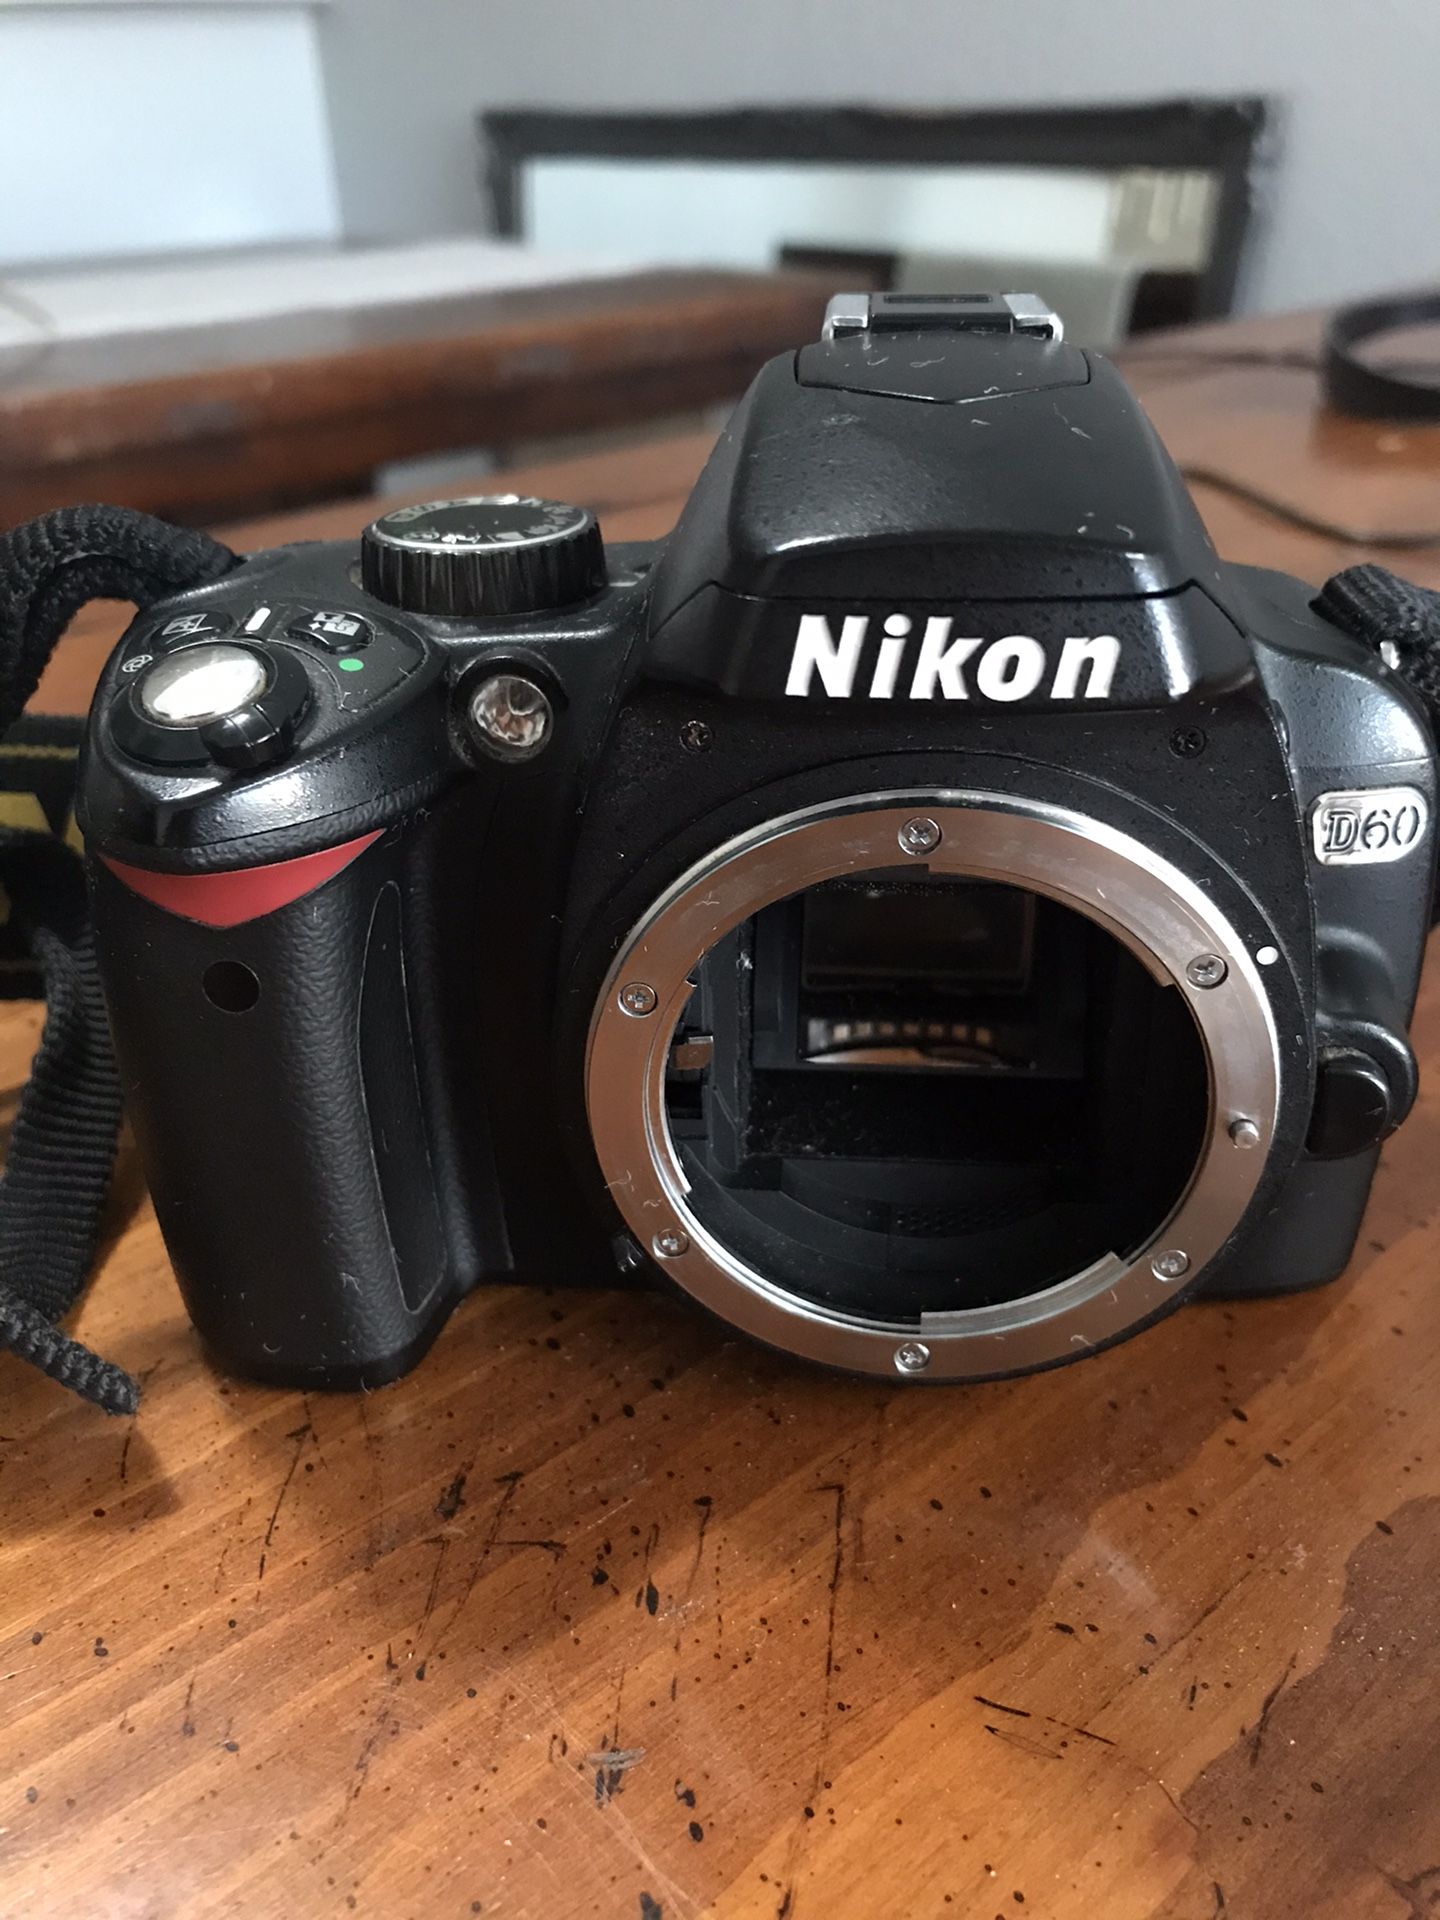 Nikon D60 with 18-55mm and 55-200mm lenses and a charger